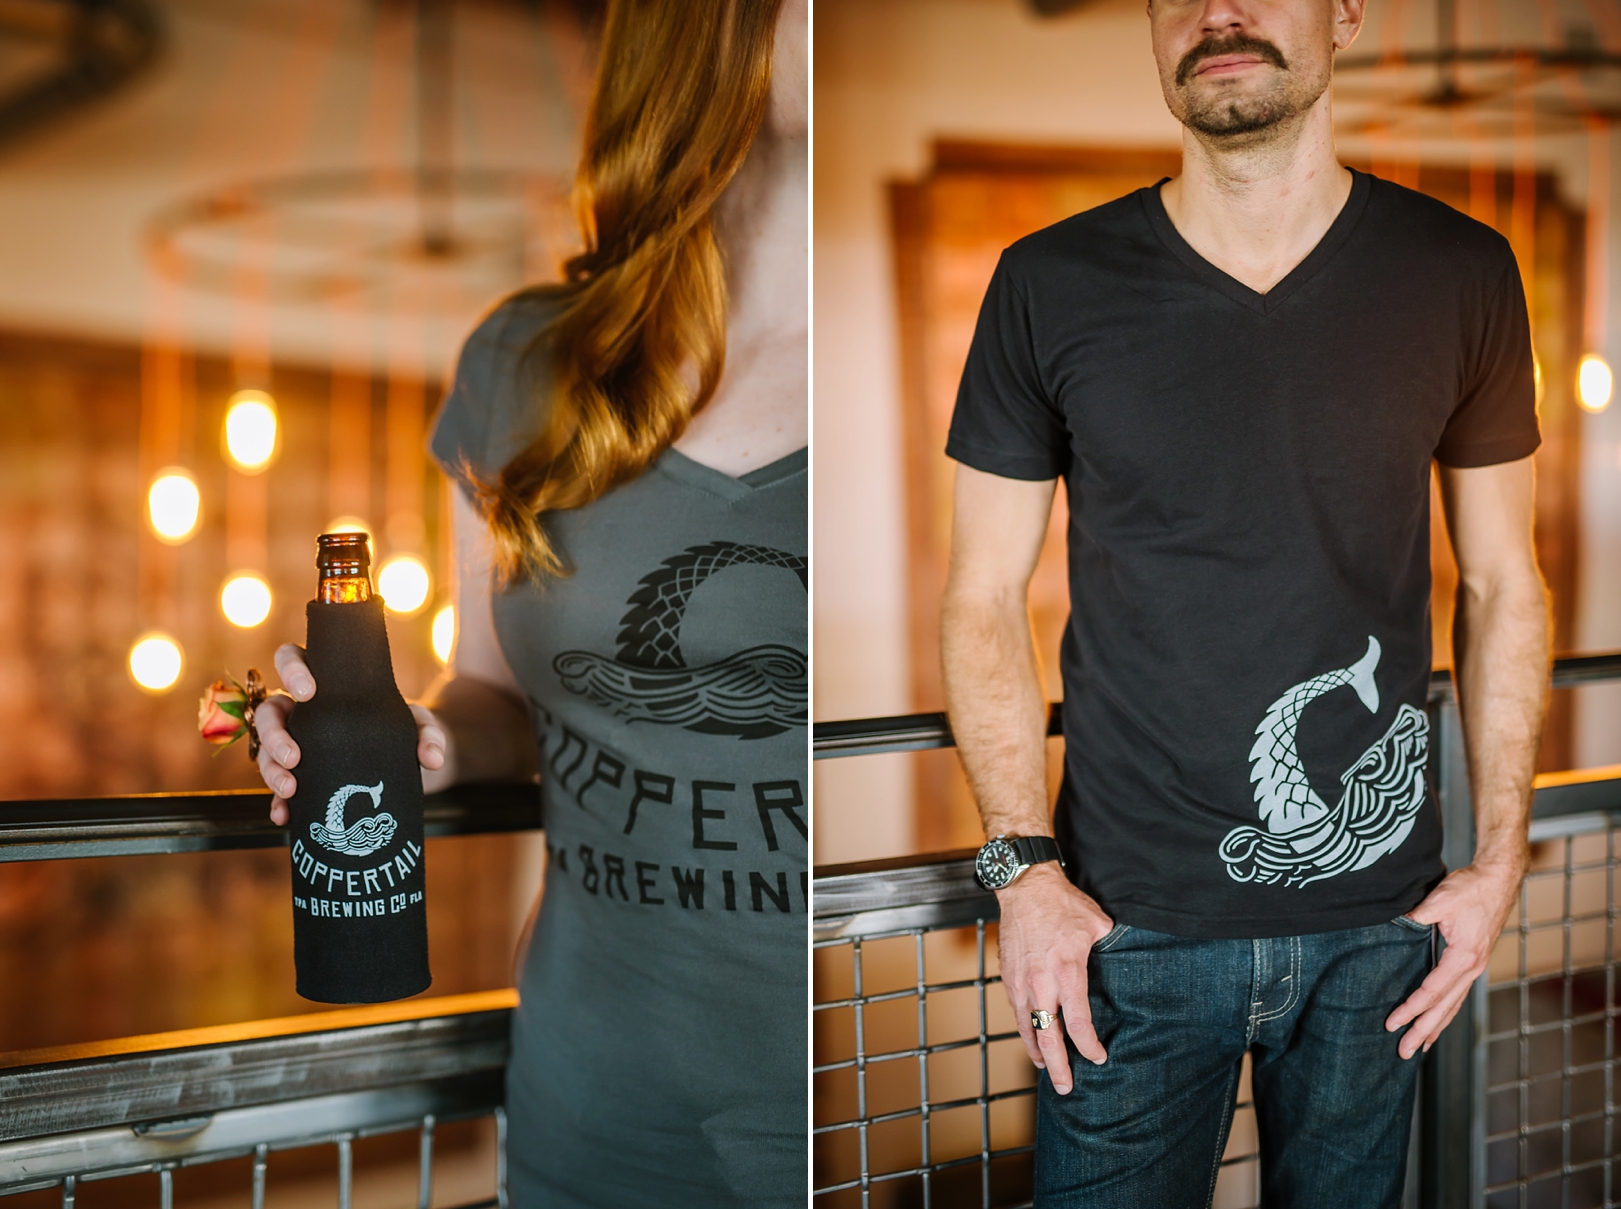 tampa-commercial-photographer-coppertail-brewing-ashlee-hamon_0001.jpg